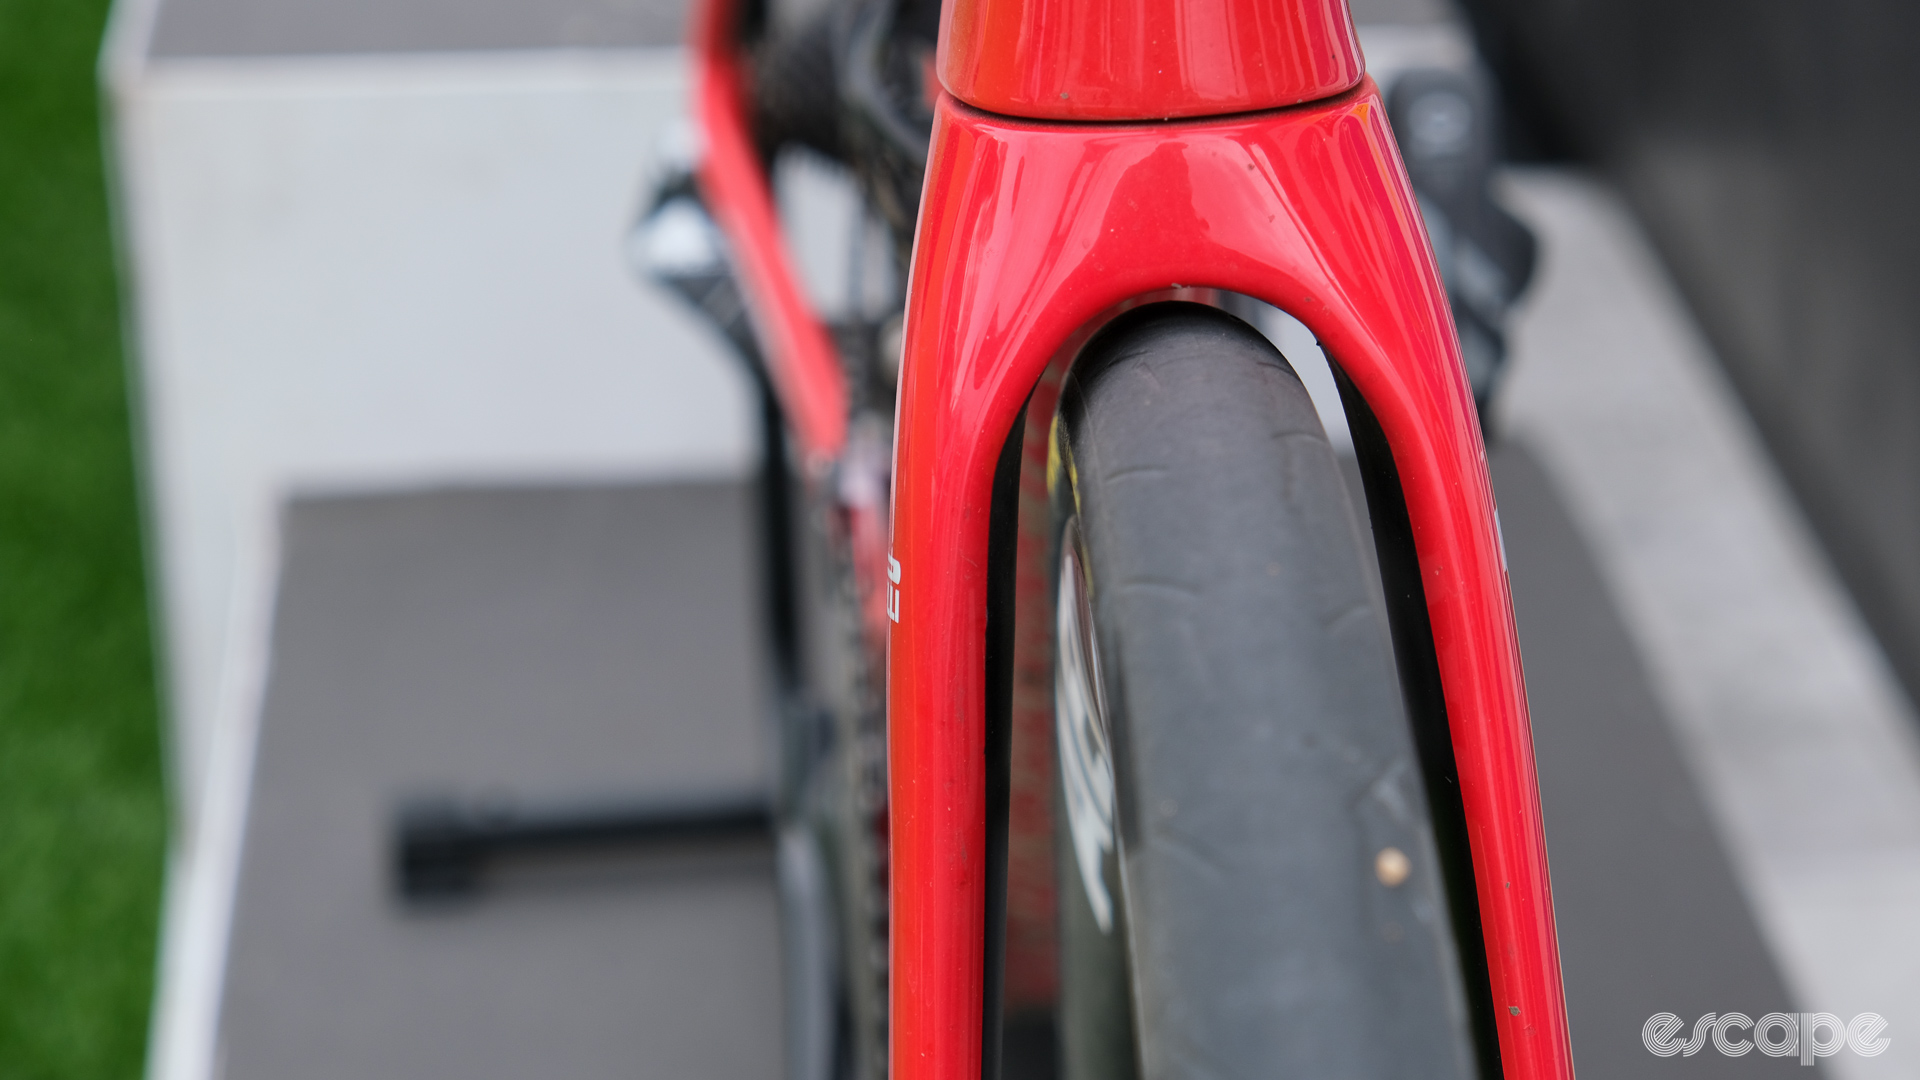 The image shows Mads Pedersen's Trek Madone fork and front tyre. 